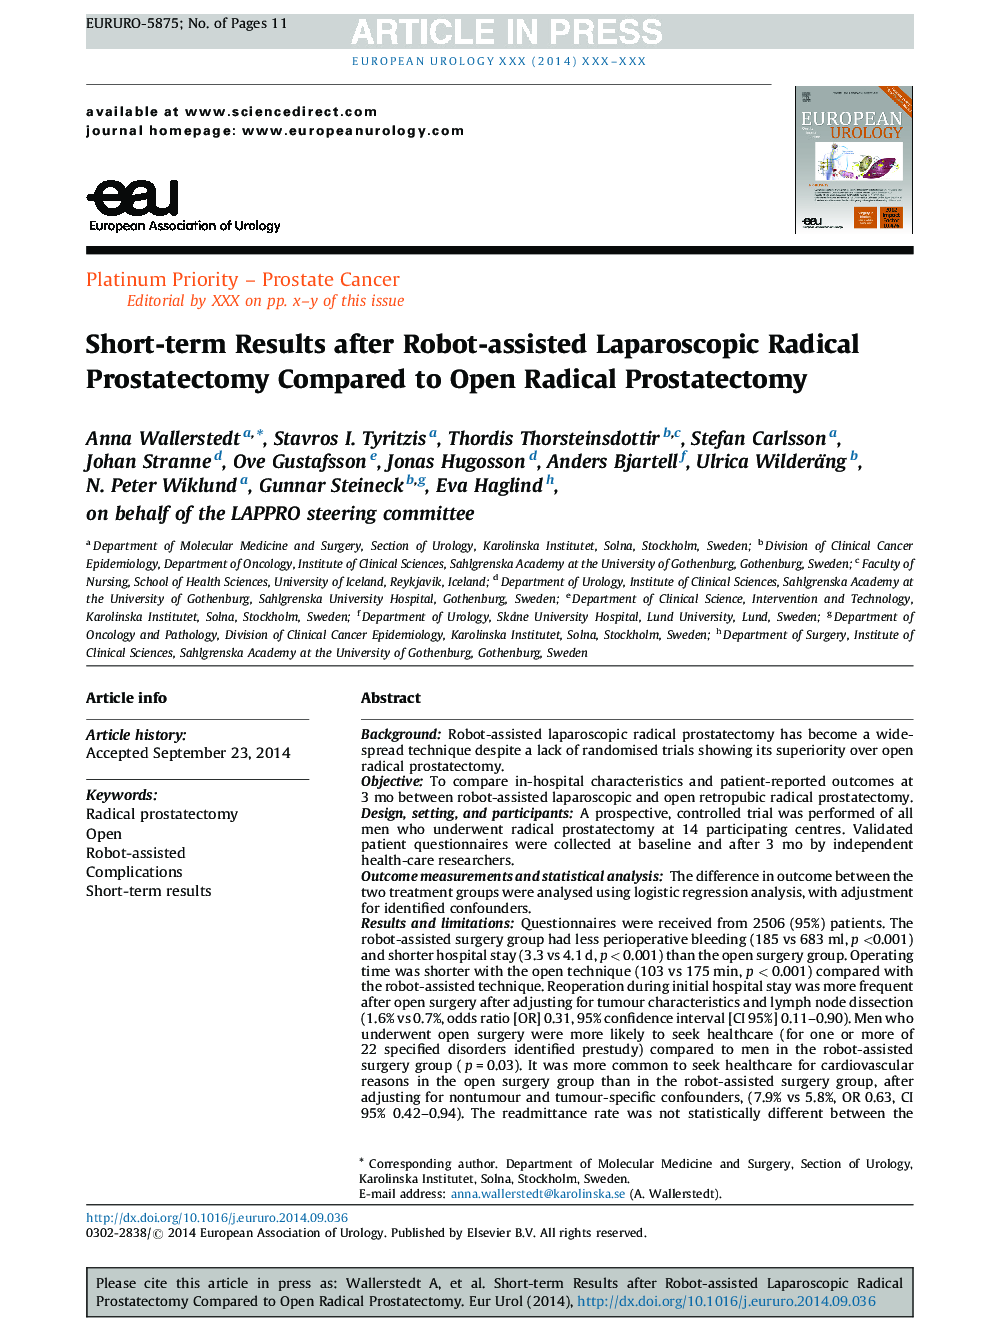 Short-term Results after Robot-assisted Laparoscopic Radical Prostatectomy Compared to Open Radical Prostatectomy